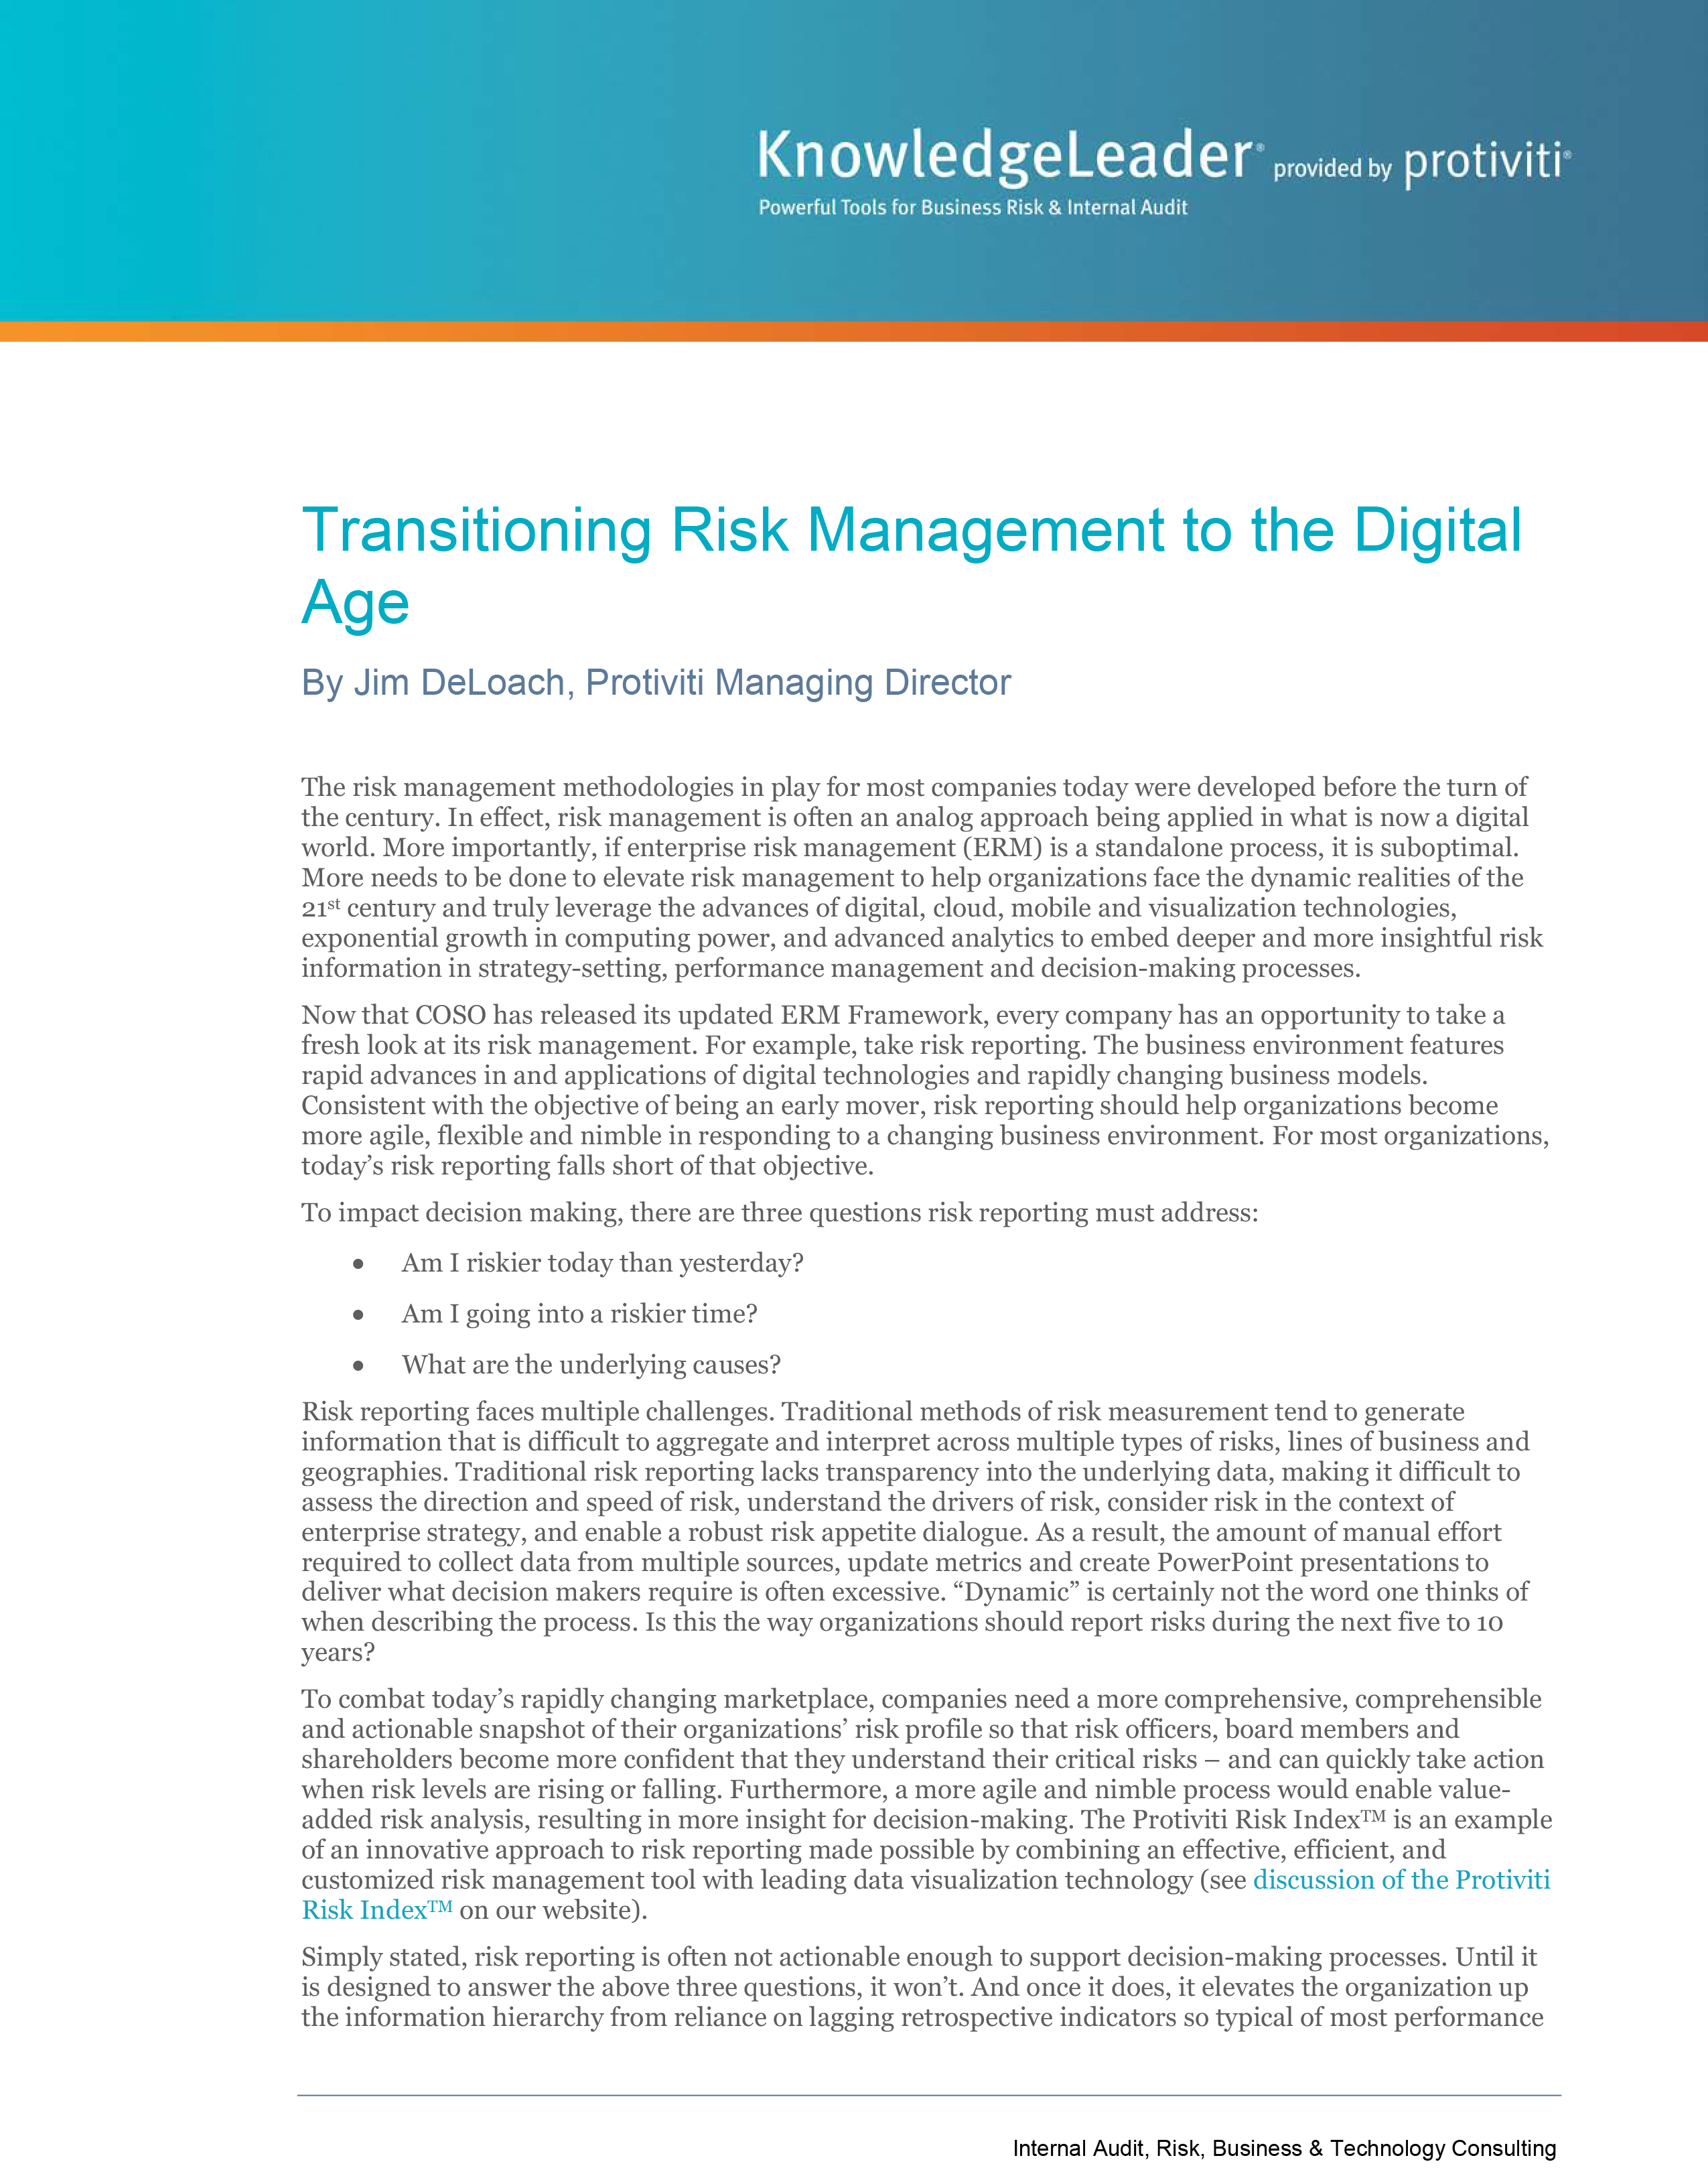 Screenshot of the first page of Transitioning Risk Management to the Digital Age